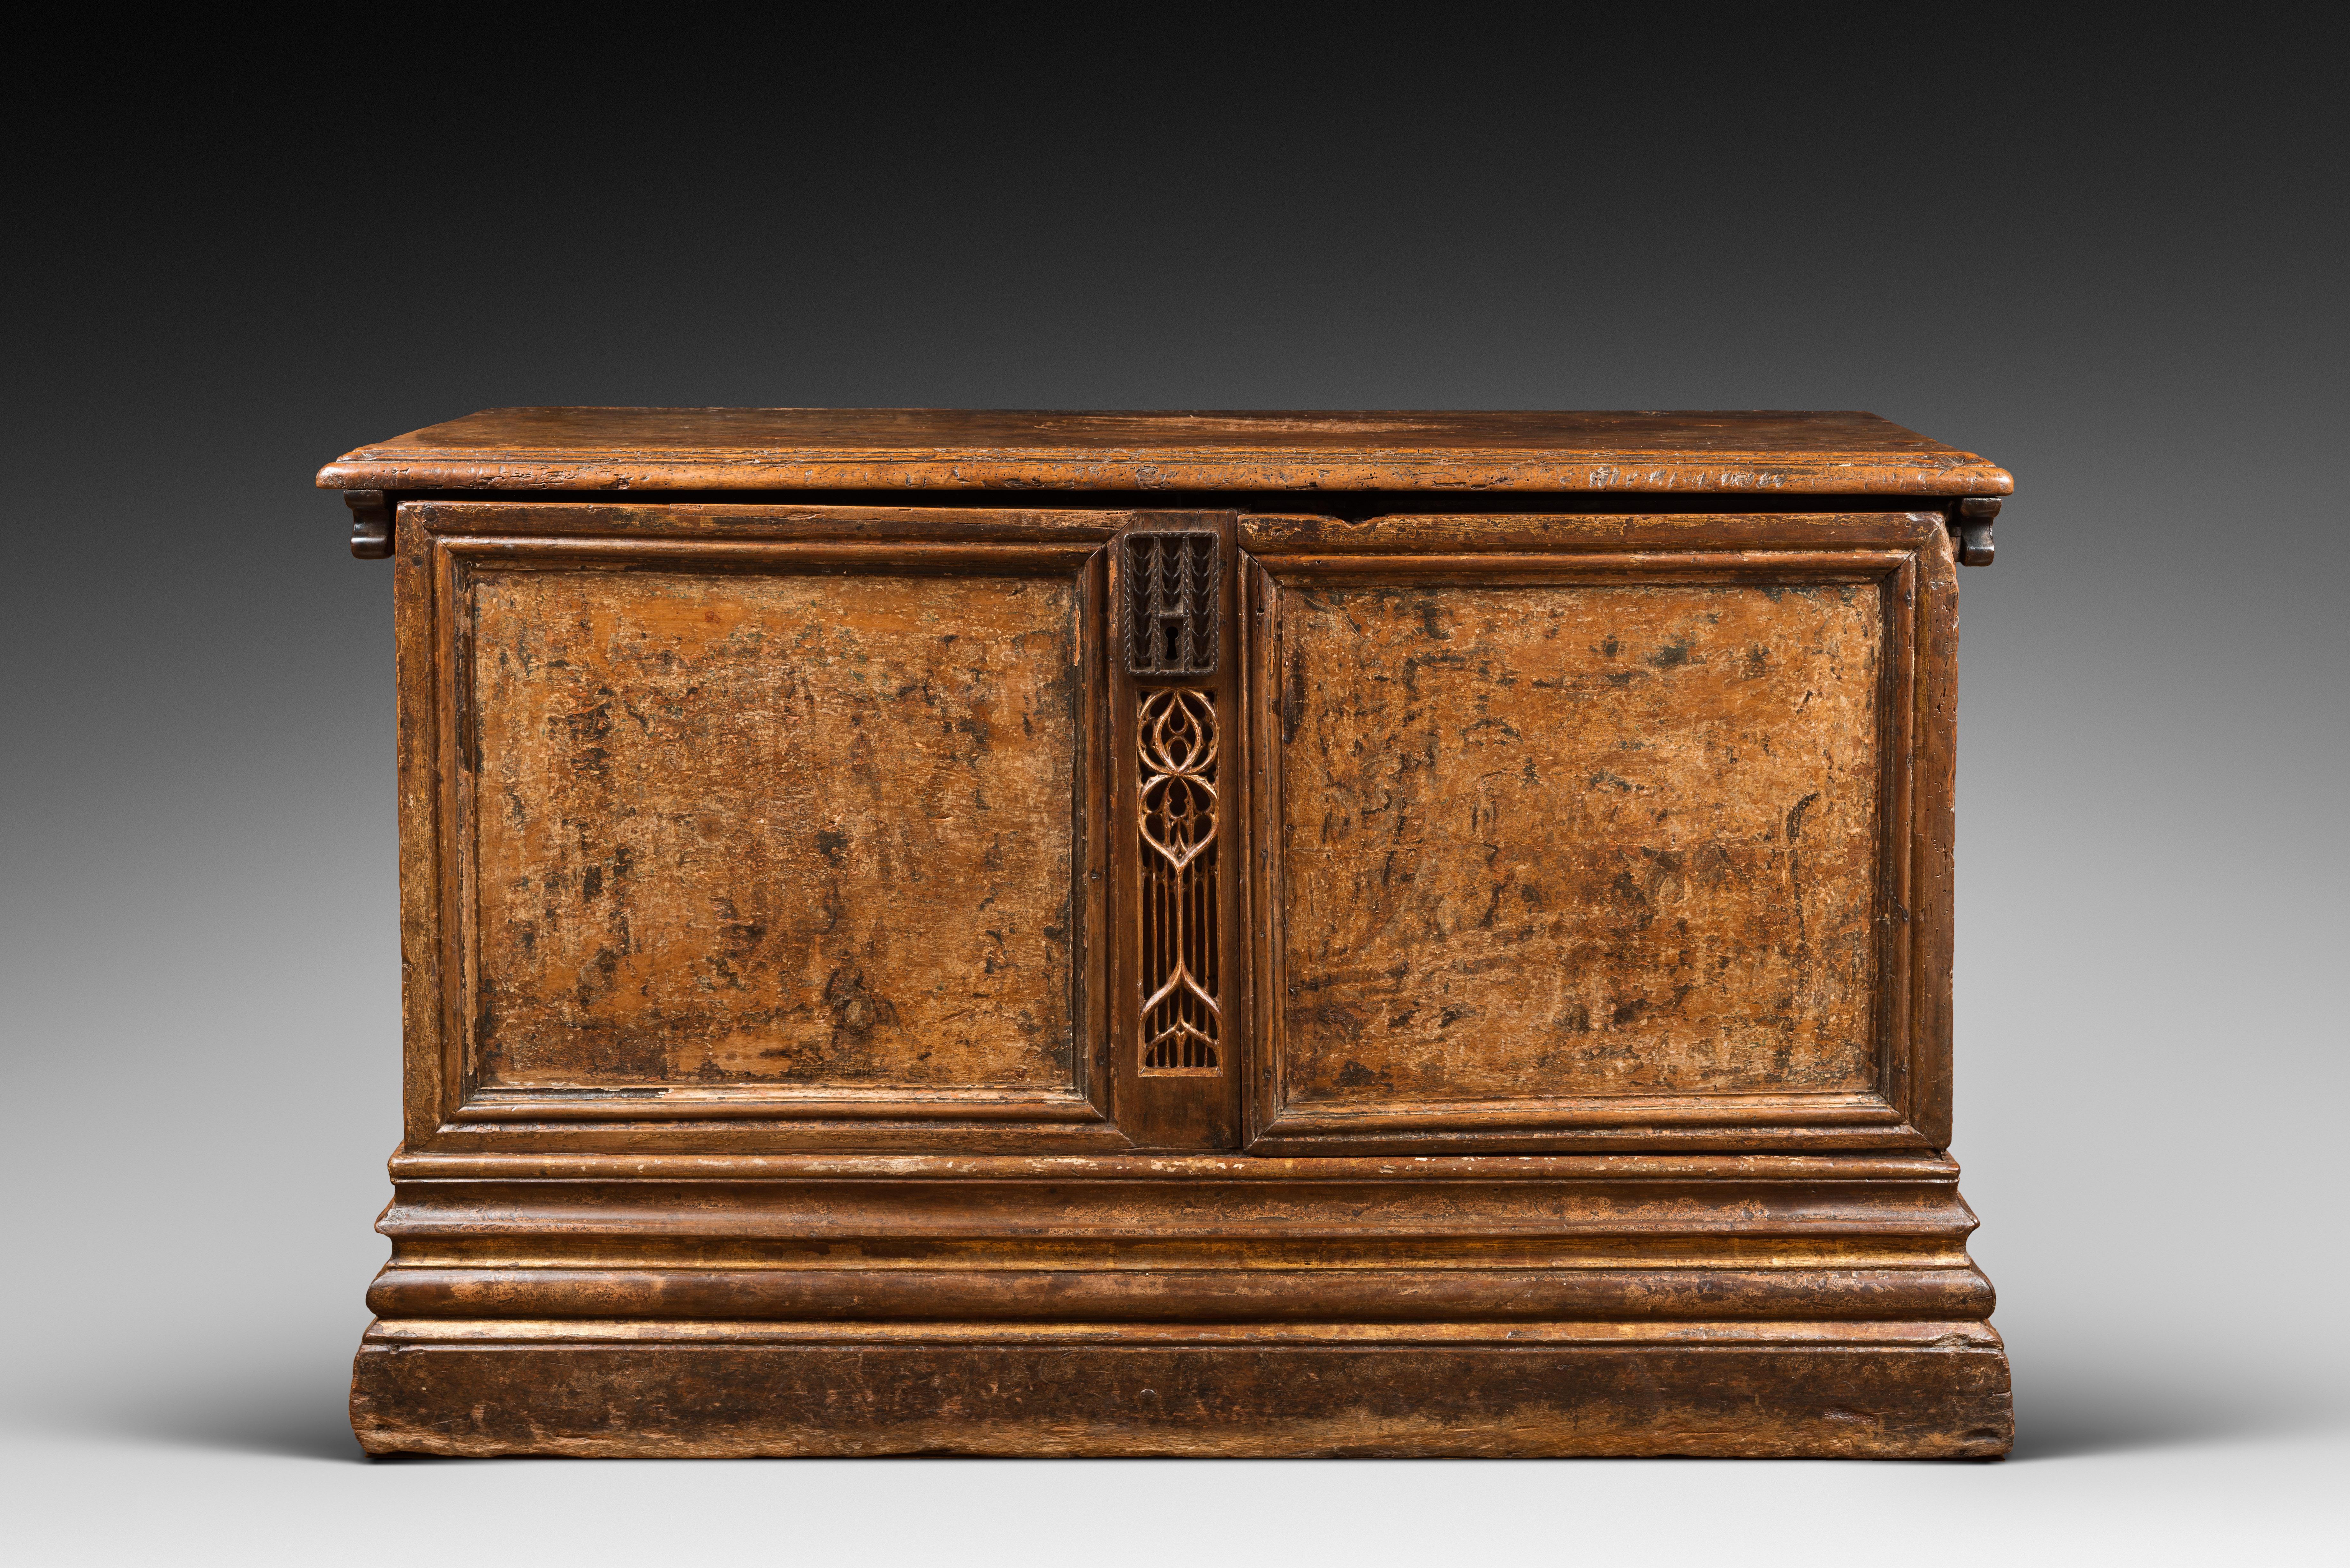 This chest stands on a high moulded plinth. It was made from a fine walnut wood and shows good traces of polychromy and gold leaf decor. 

The facade’s two panels, once colourful, are divided by a Gothic fenestration element. The lateral panels